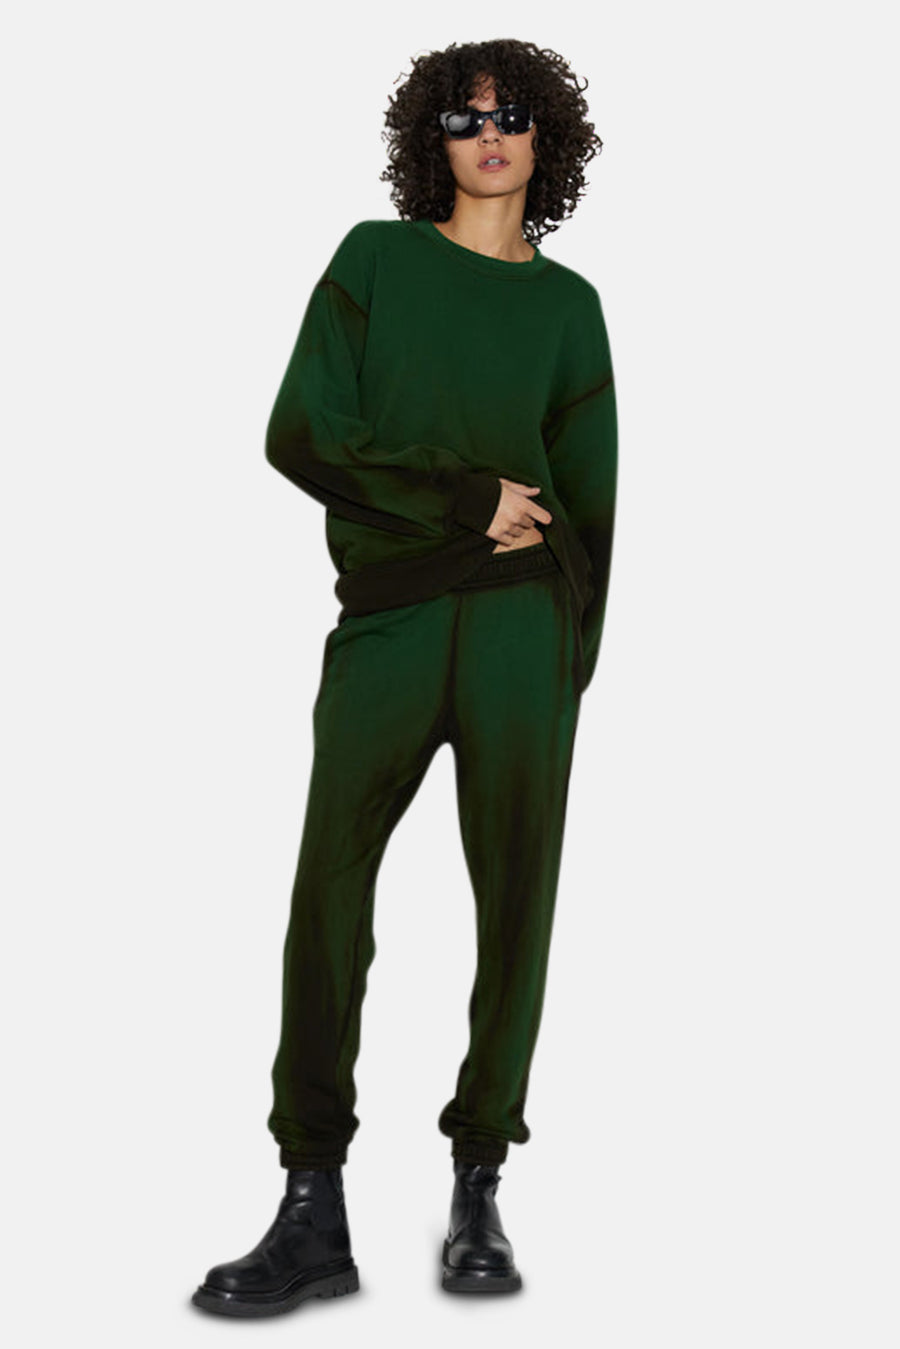 Brooklyn Oversized Crew Forest Green Cast